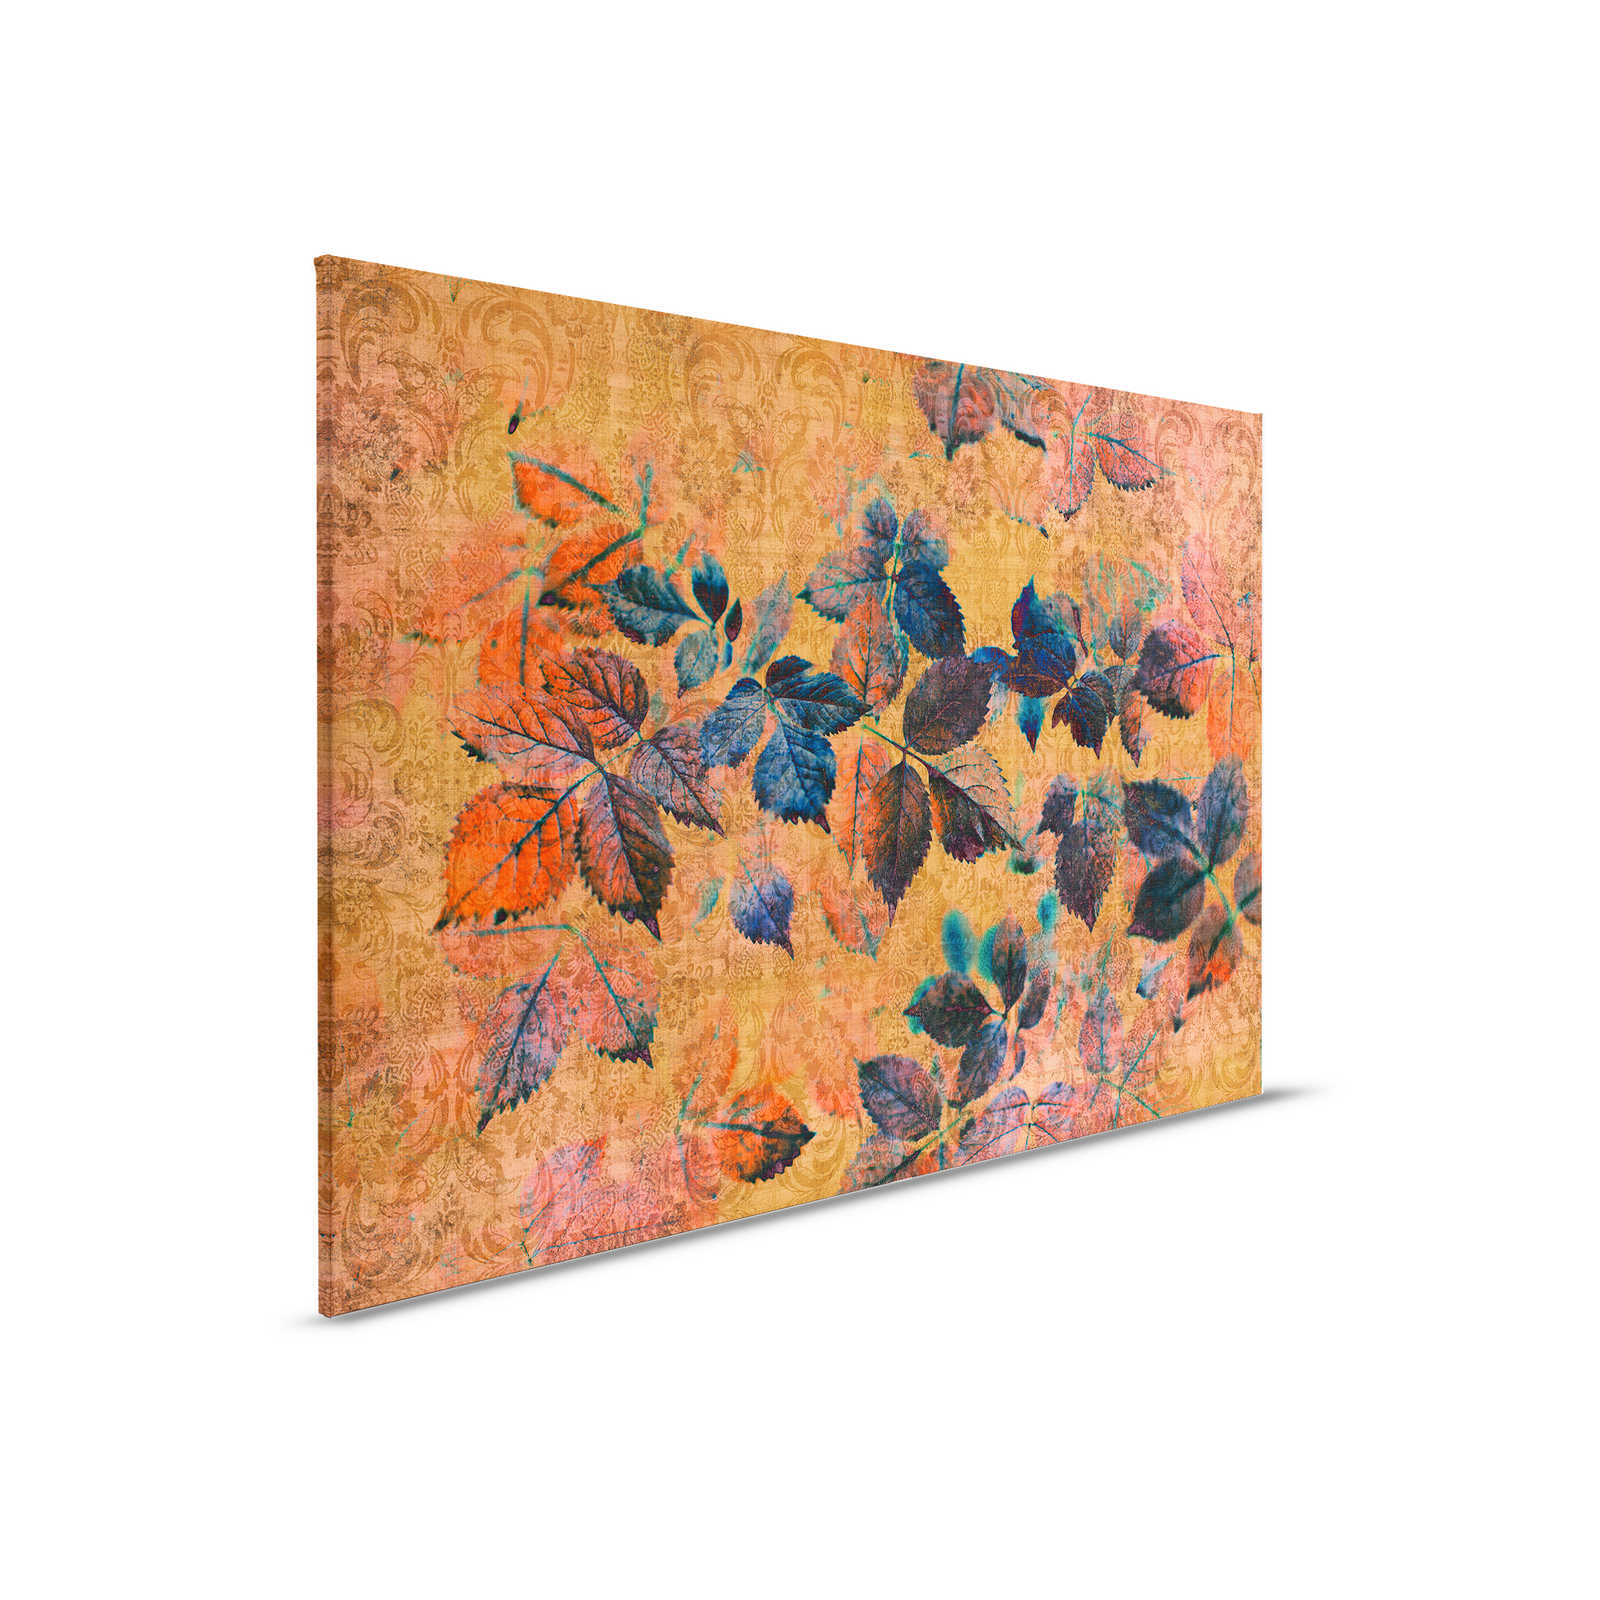 Indian summer 2 - Flowers canvas picture in natural linen structure with warm atmosphere - 0,90 m x 0,60 m
